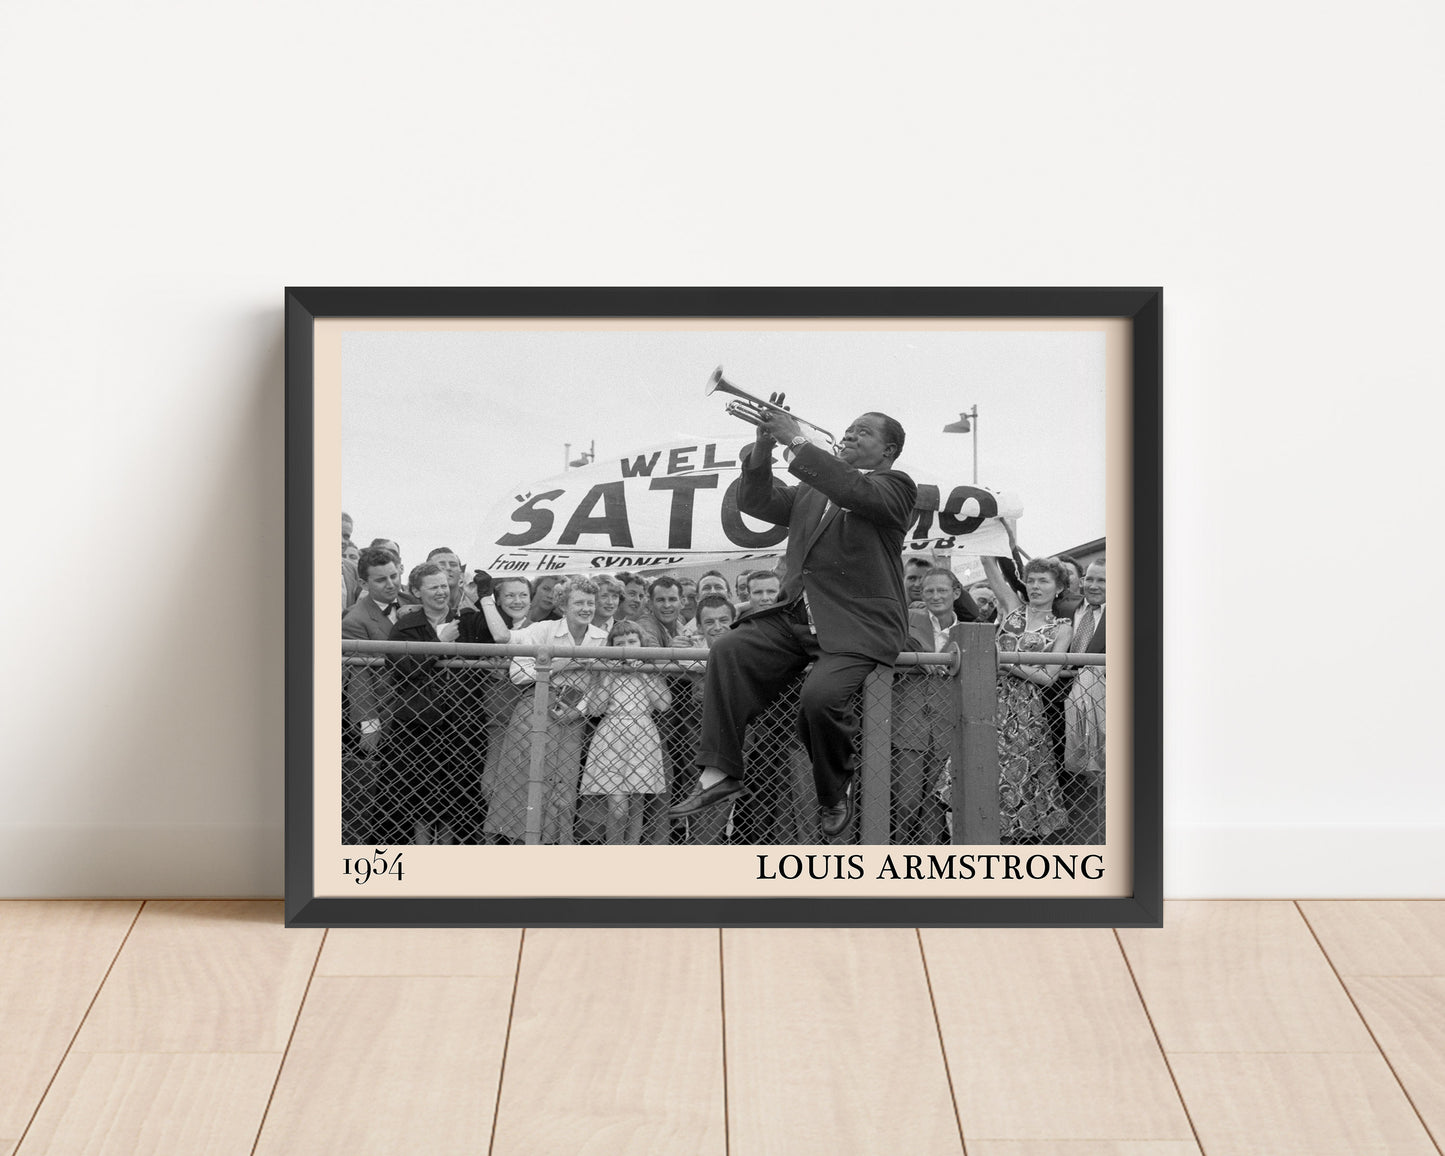 1954 print of Louis Armstrong playing trumpet on a fence. Picture crafted into a black framed poster, with an off-white border. Poster is propped against a white wall